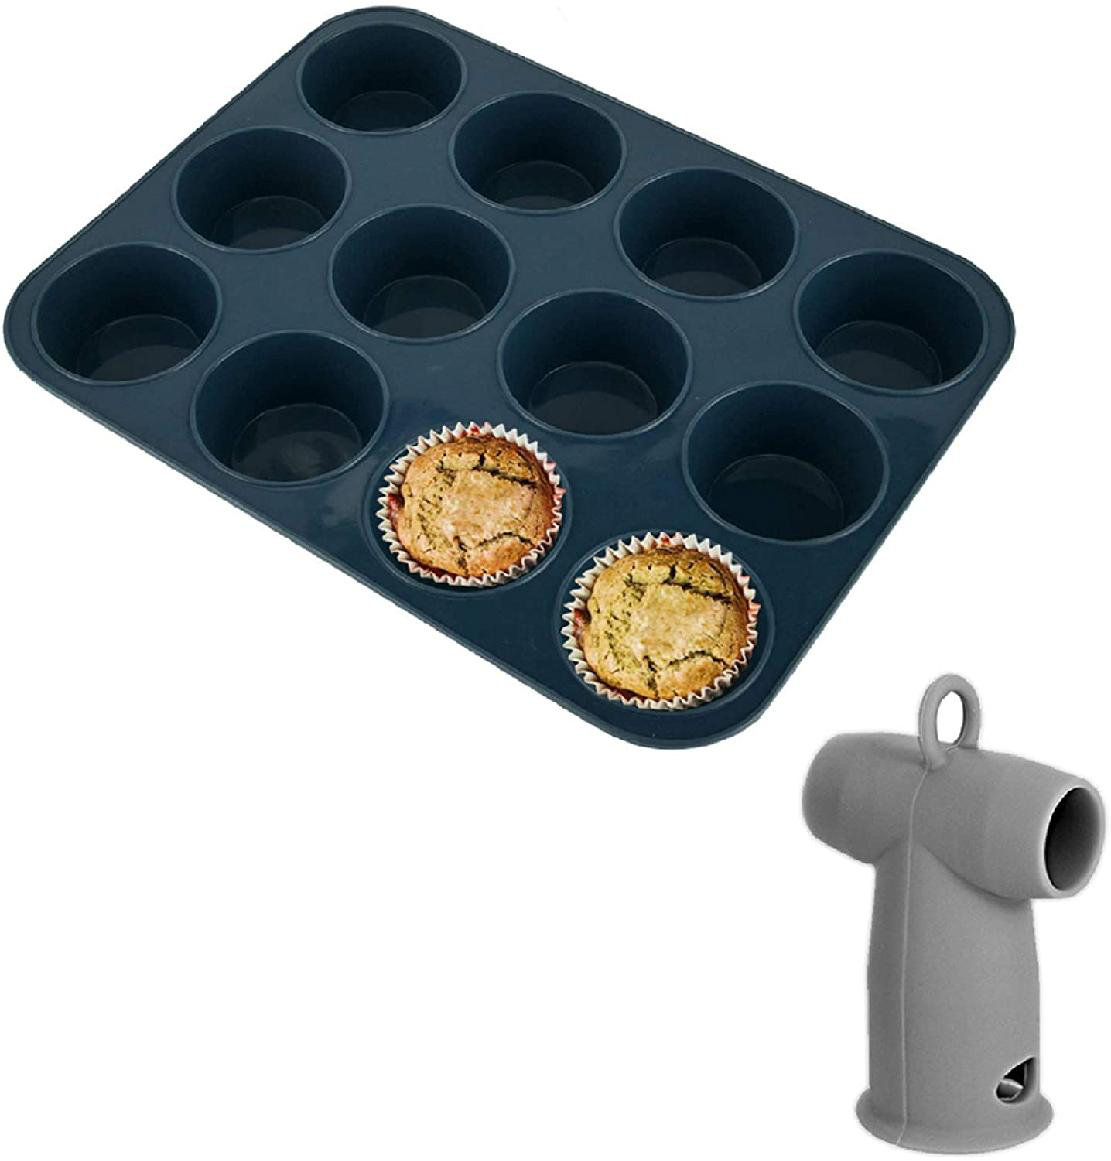 12 cup non stick. 6cm diameter muffins yorkshire pudding tray carbon steel 